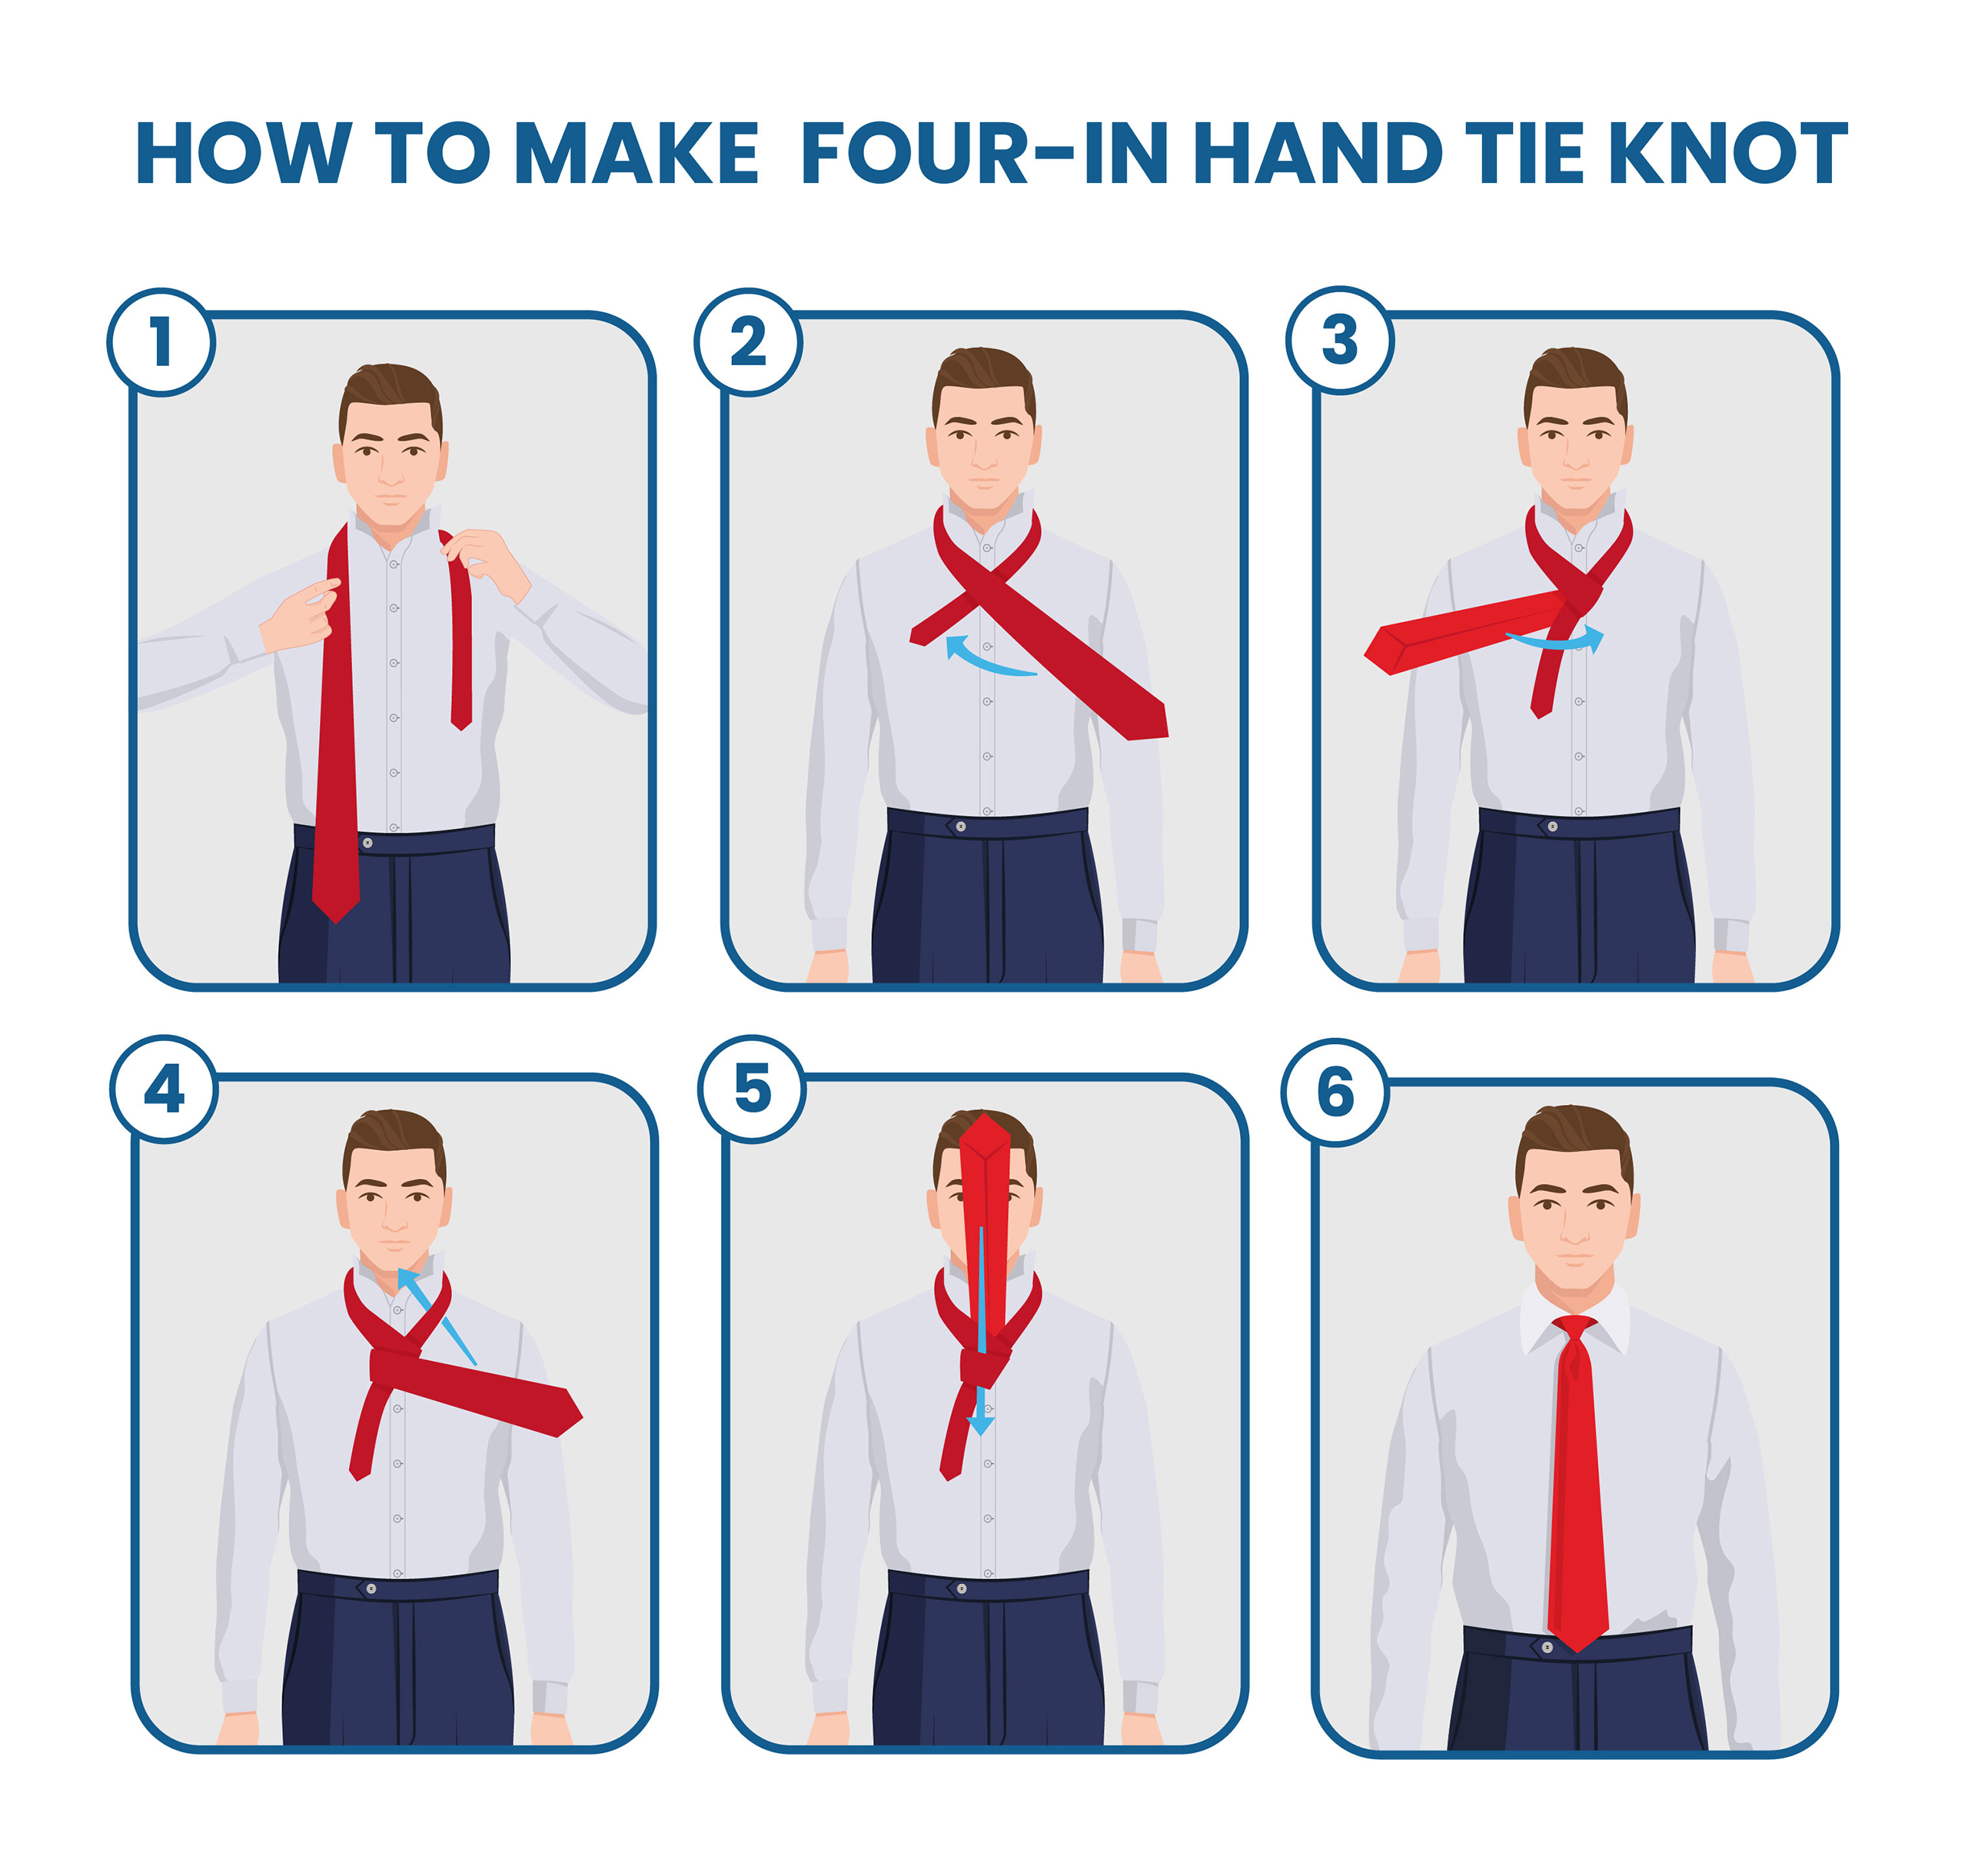 how to tie the four-in-hand knot